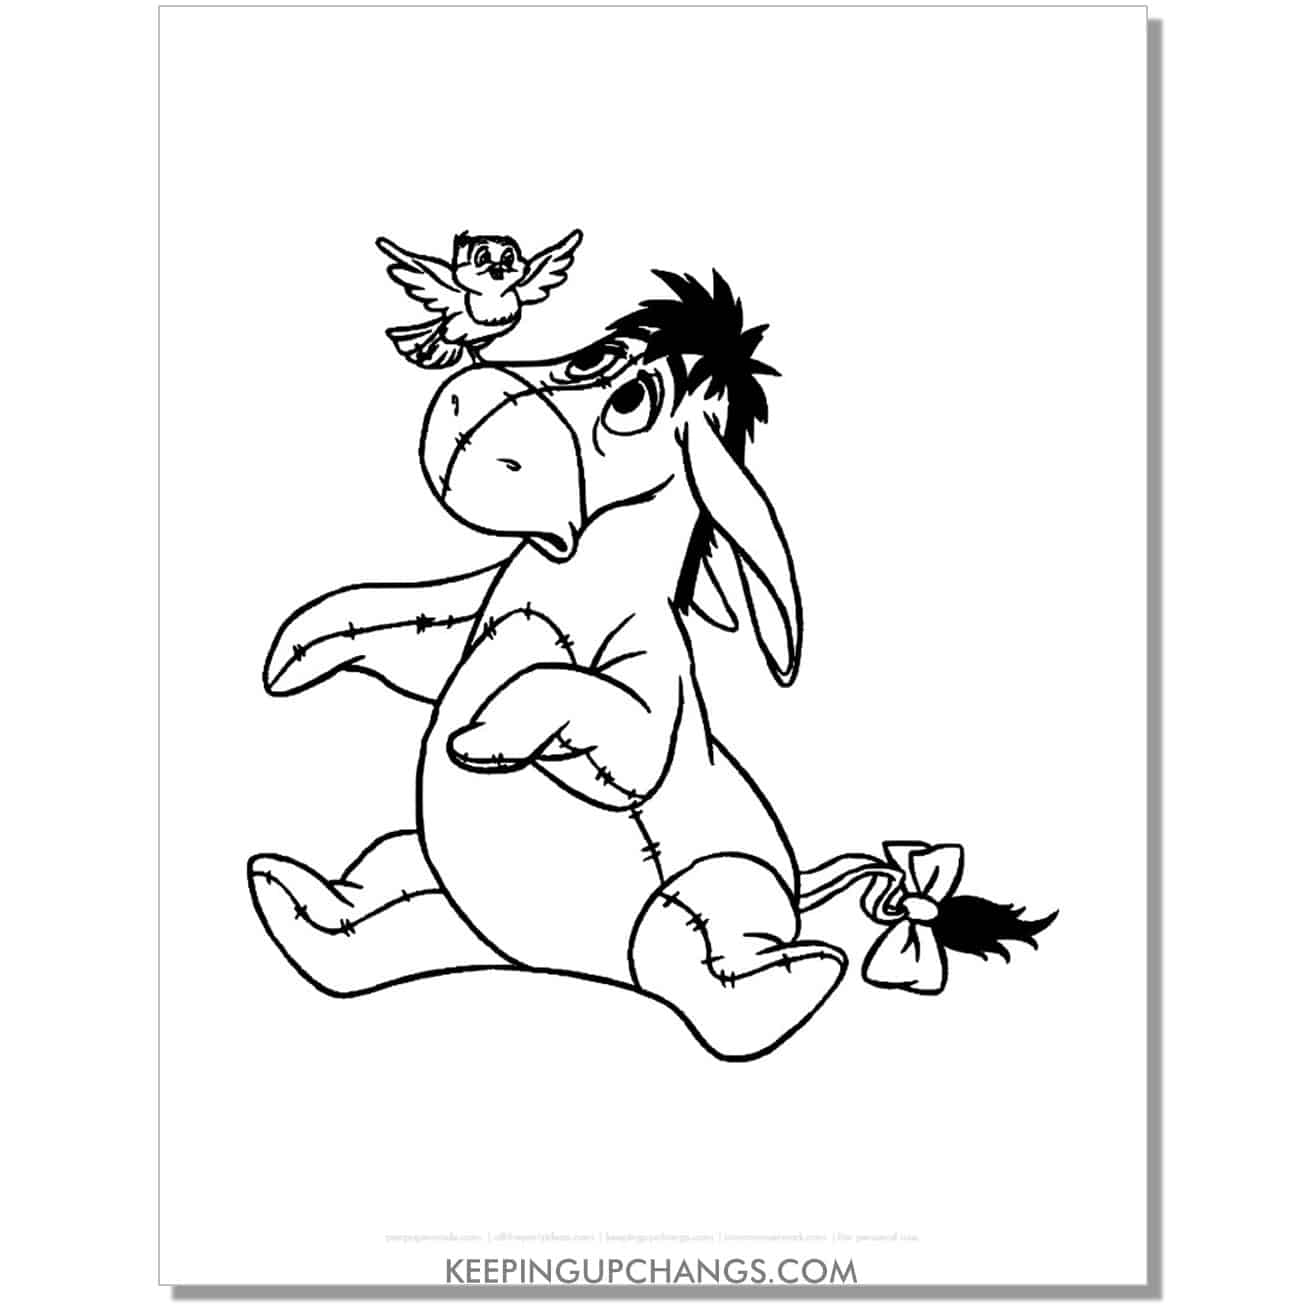 eeyore with bird on nose waving coloring page, sheet.